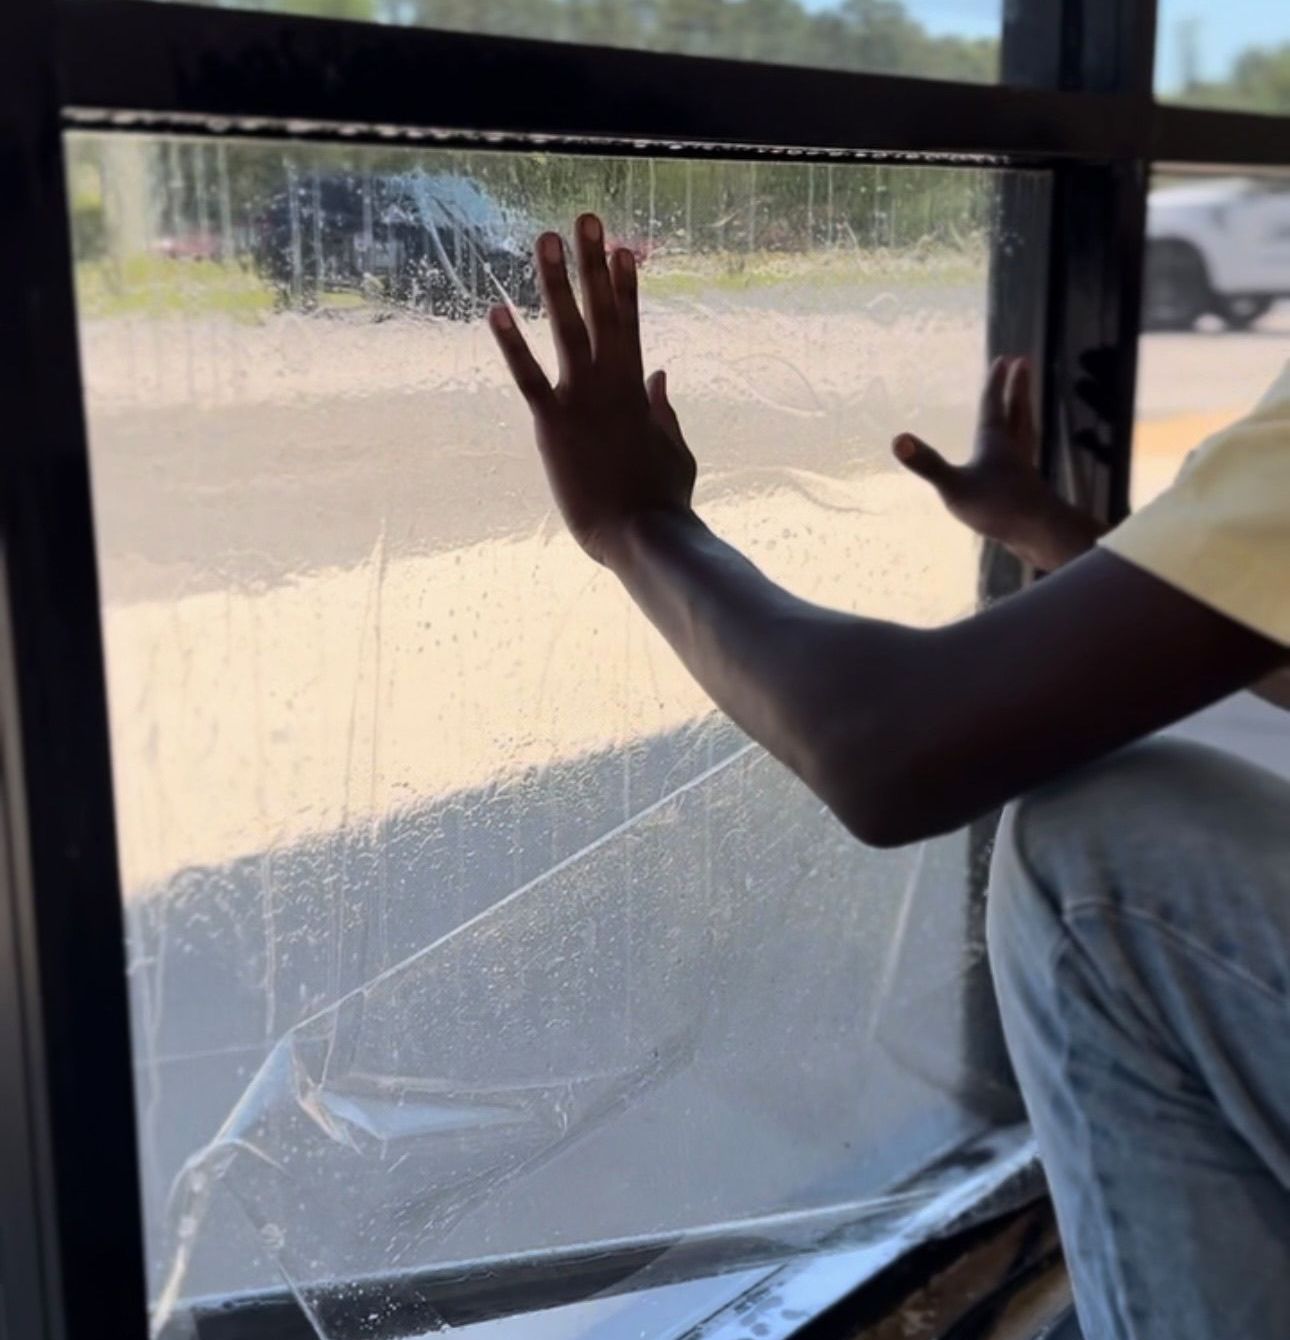 a person is touching a window with their hand